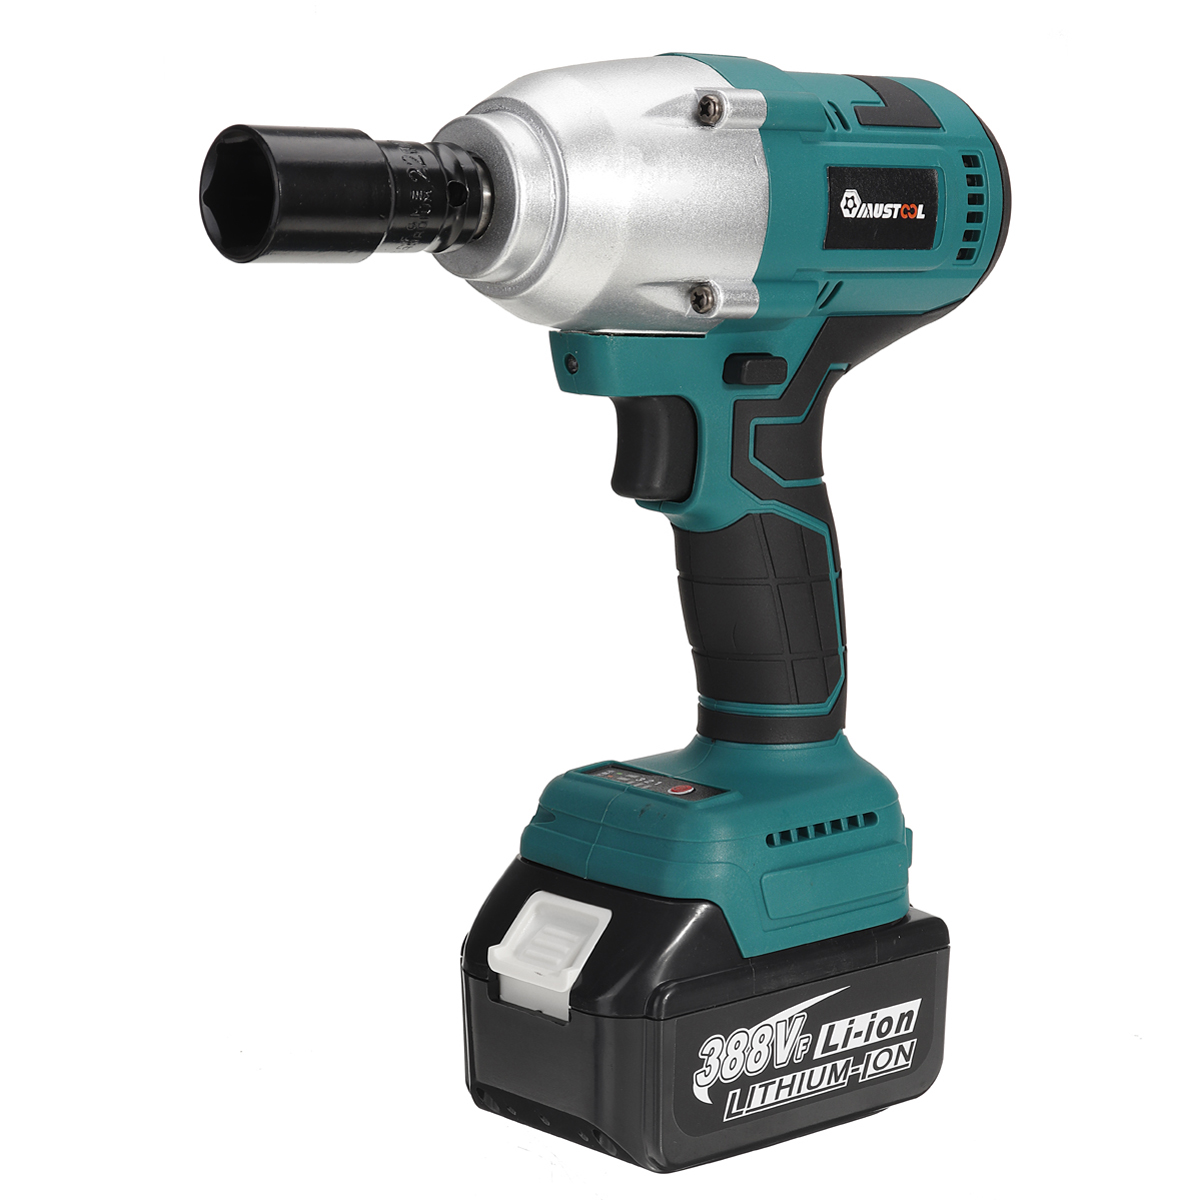 Find MUSTOOL 1600N M 6200rpm Brushless Electric Impact Wrench 1/2inch Socket Wrench Forward Lock Switch with/without Battery for Sale on Gipsybee.com with cryptocurrencies